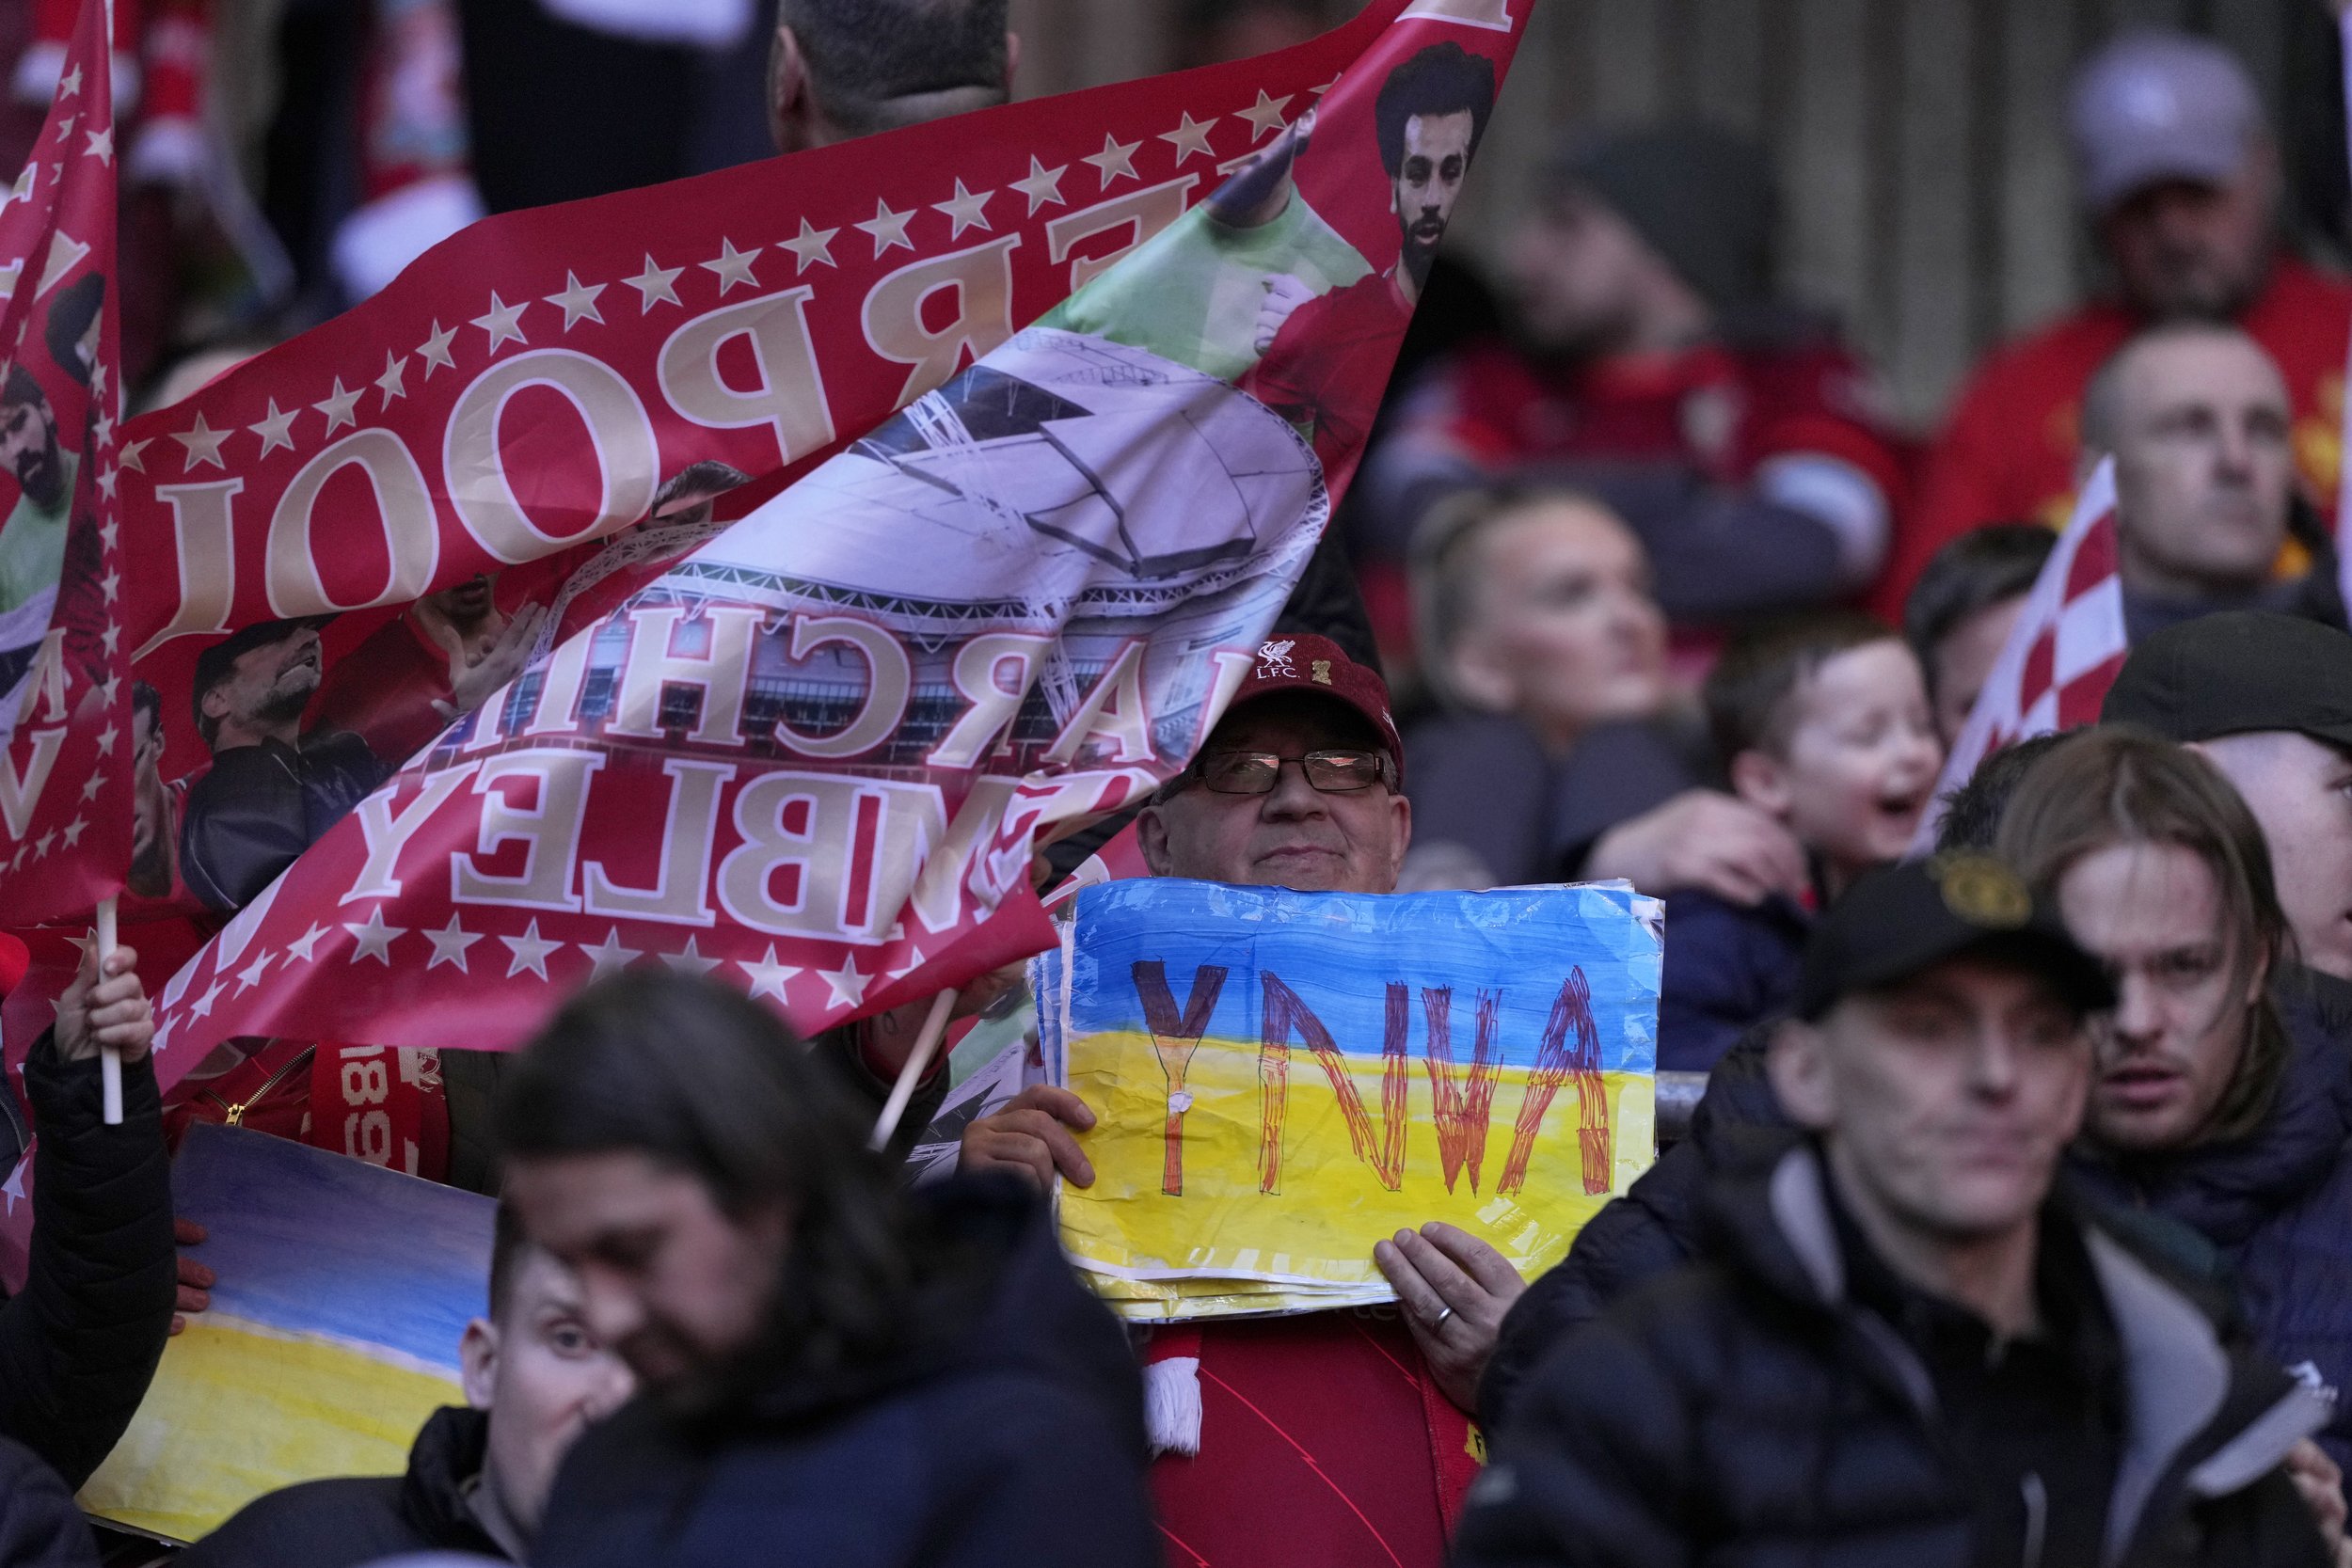  A Liverpool fan holds a sign in the Ukrainian colors with the initials of "You'll Never Walk Alone", the Liverpool anthem sung by the fans every game, during the English League Cup final soccer match between Chelsea and Liverpool at Wembley stadium 